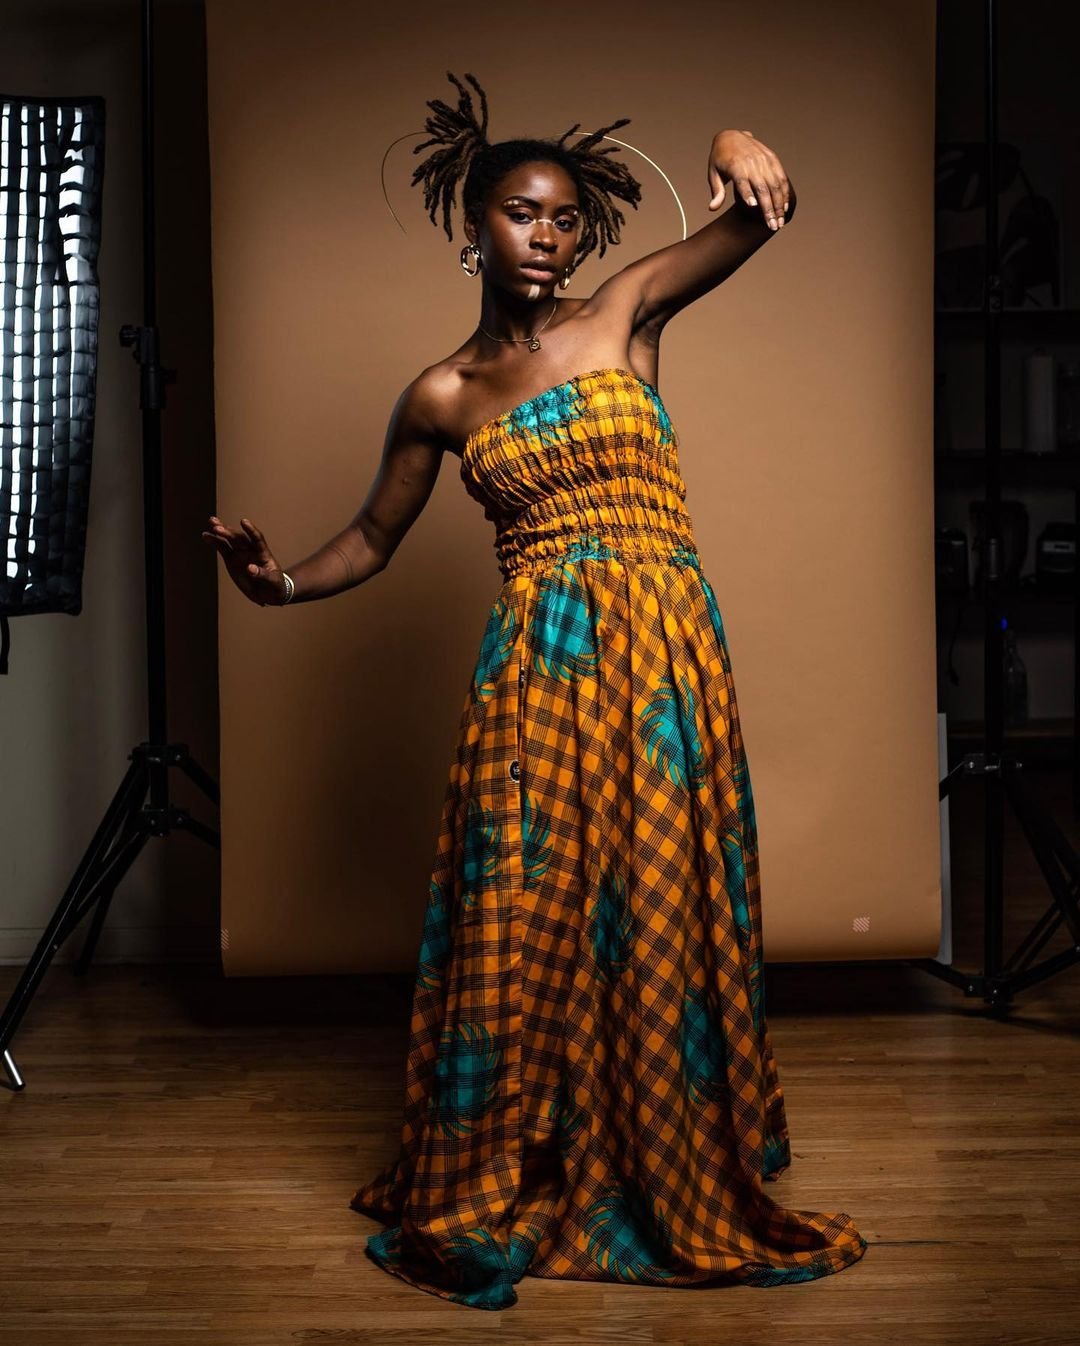 Model and creative Ayana photographed by Philip Muriel for Afrofuturism: A Photoshoot Party.